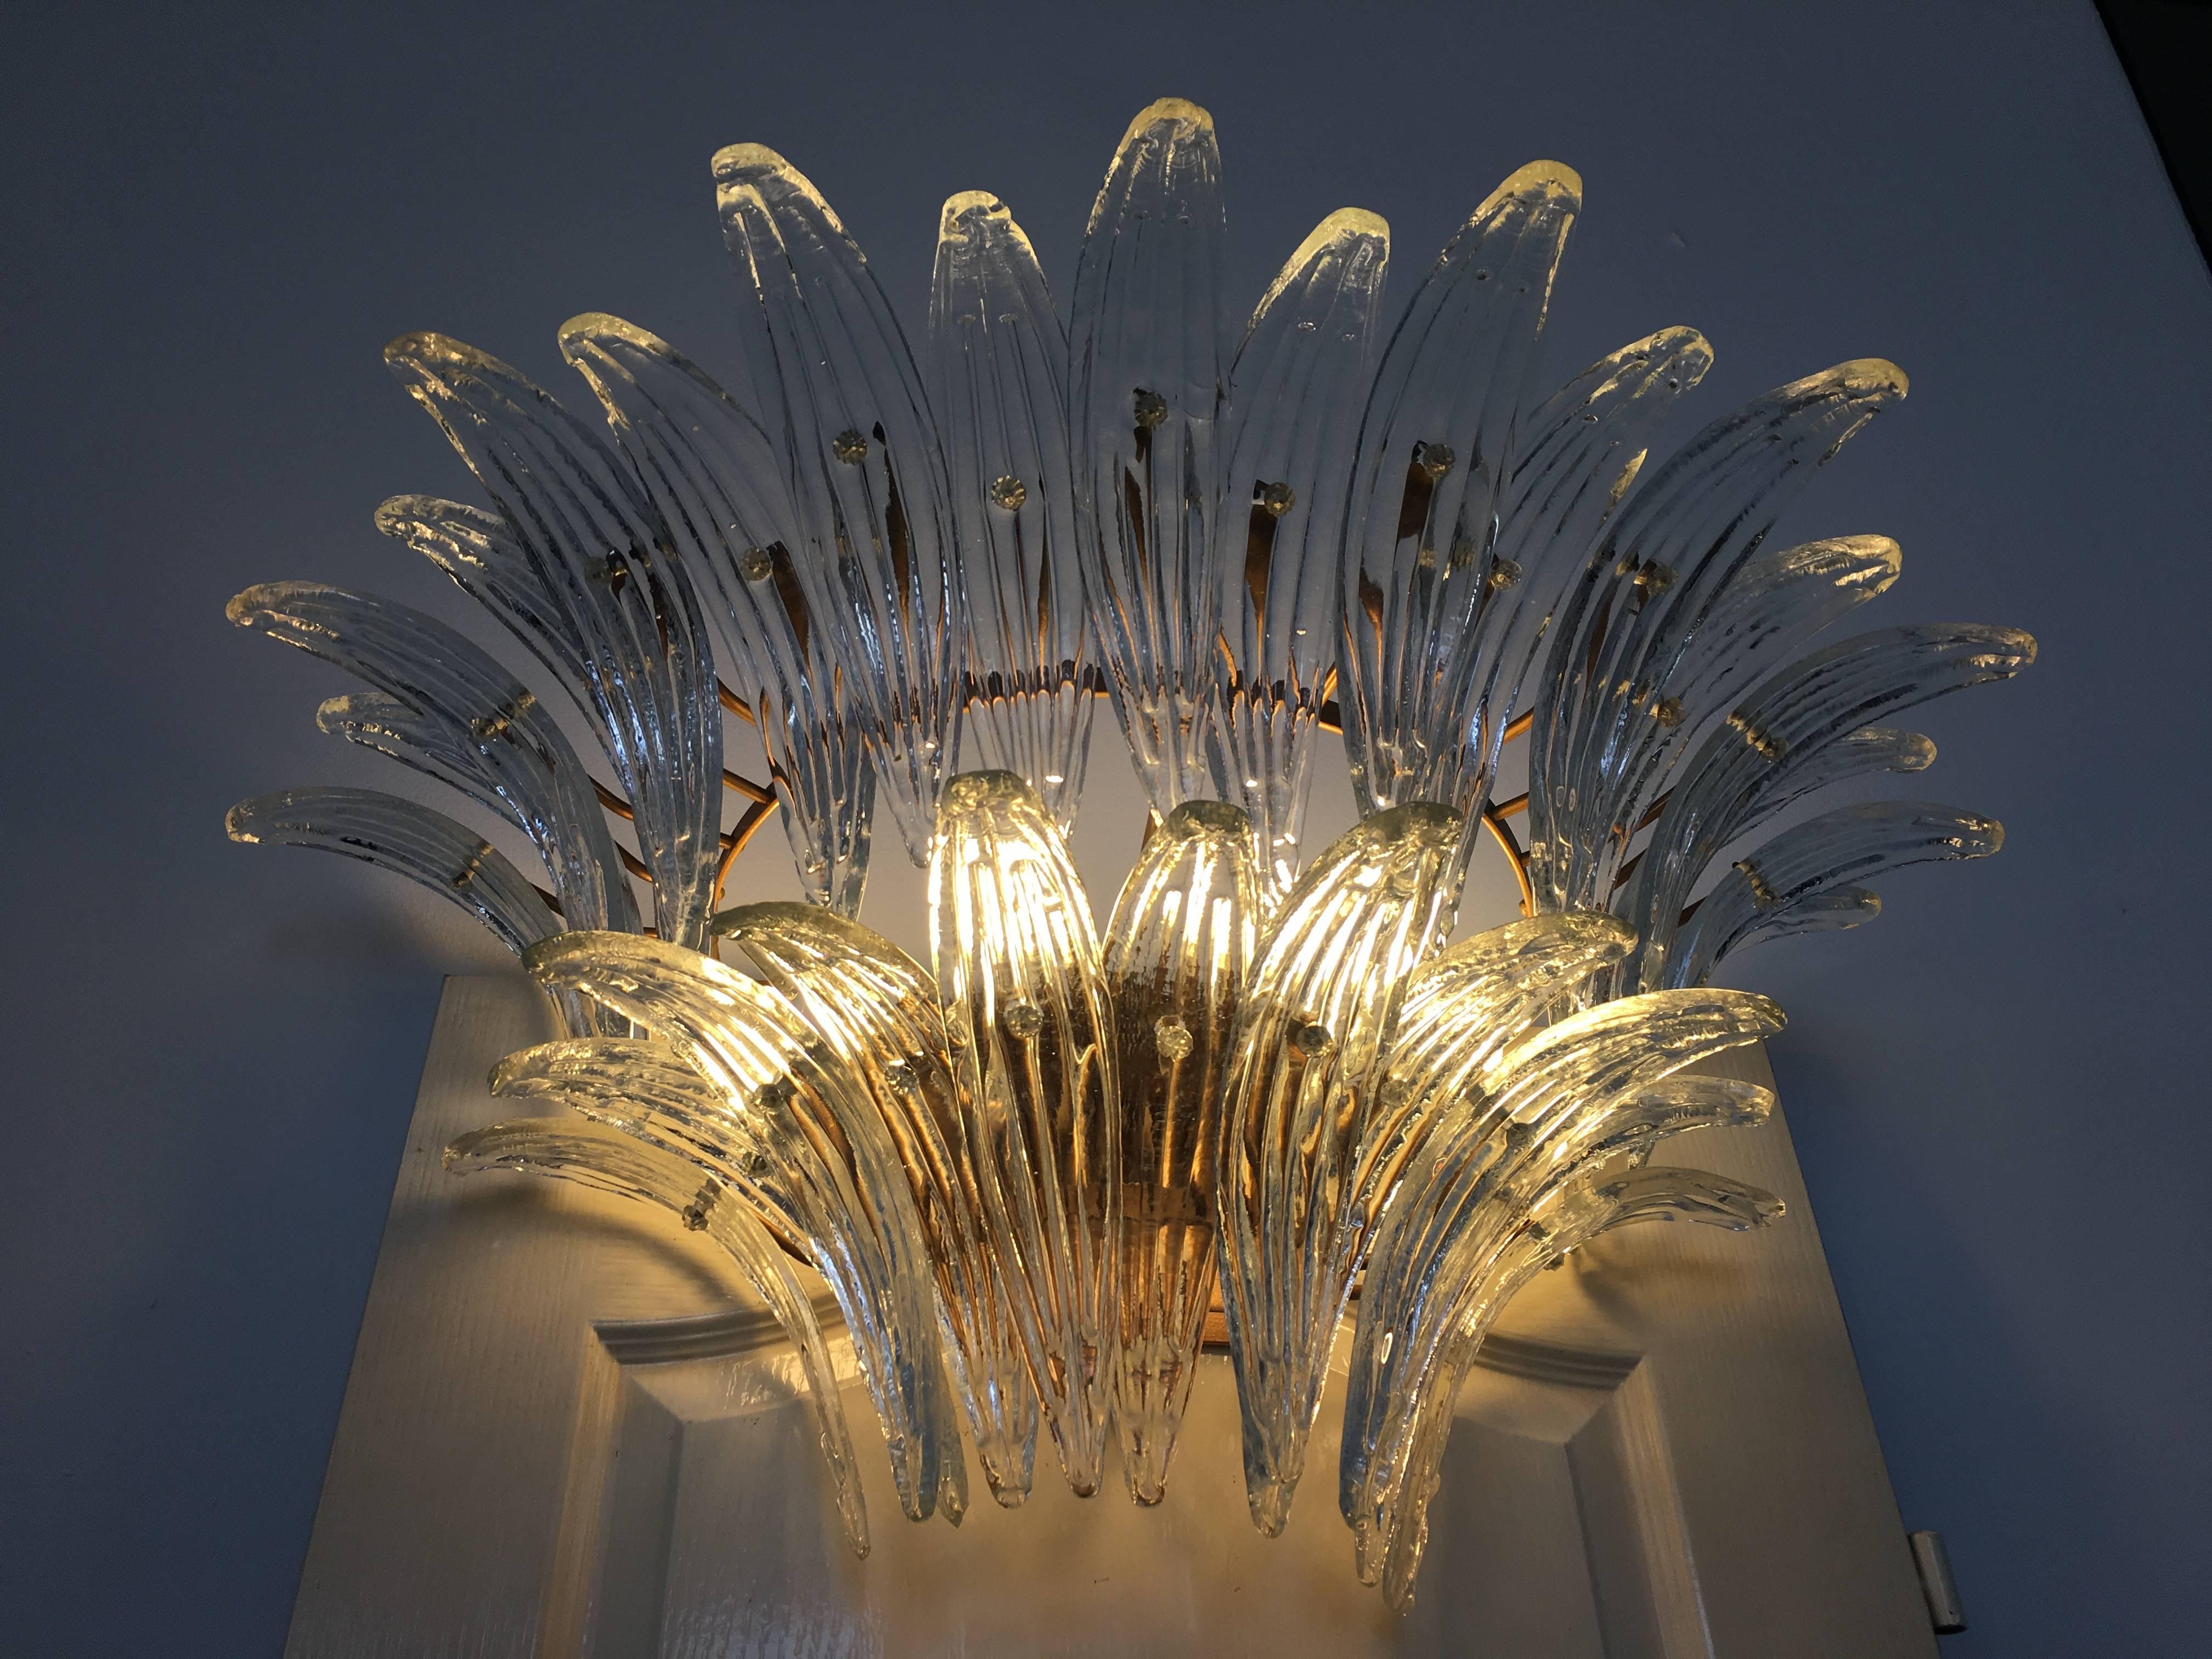 The sconces and chandeliers were located in the hall of a big hotel on the Amalfi Coast. Each individual sconce is composed by 29 large leaves in pure Murano glass. Available two pairs of sconces and two pairs of chandeliers.